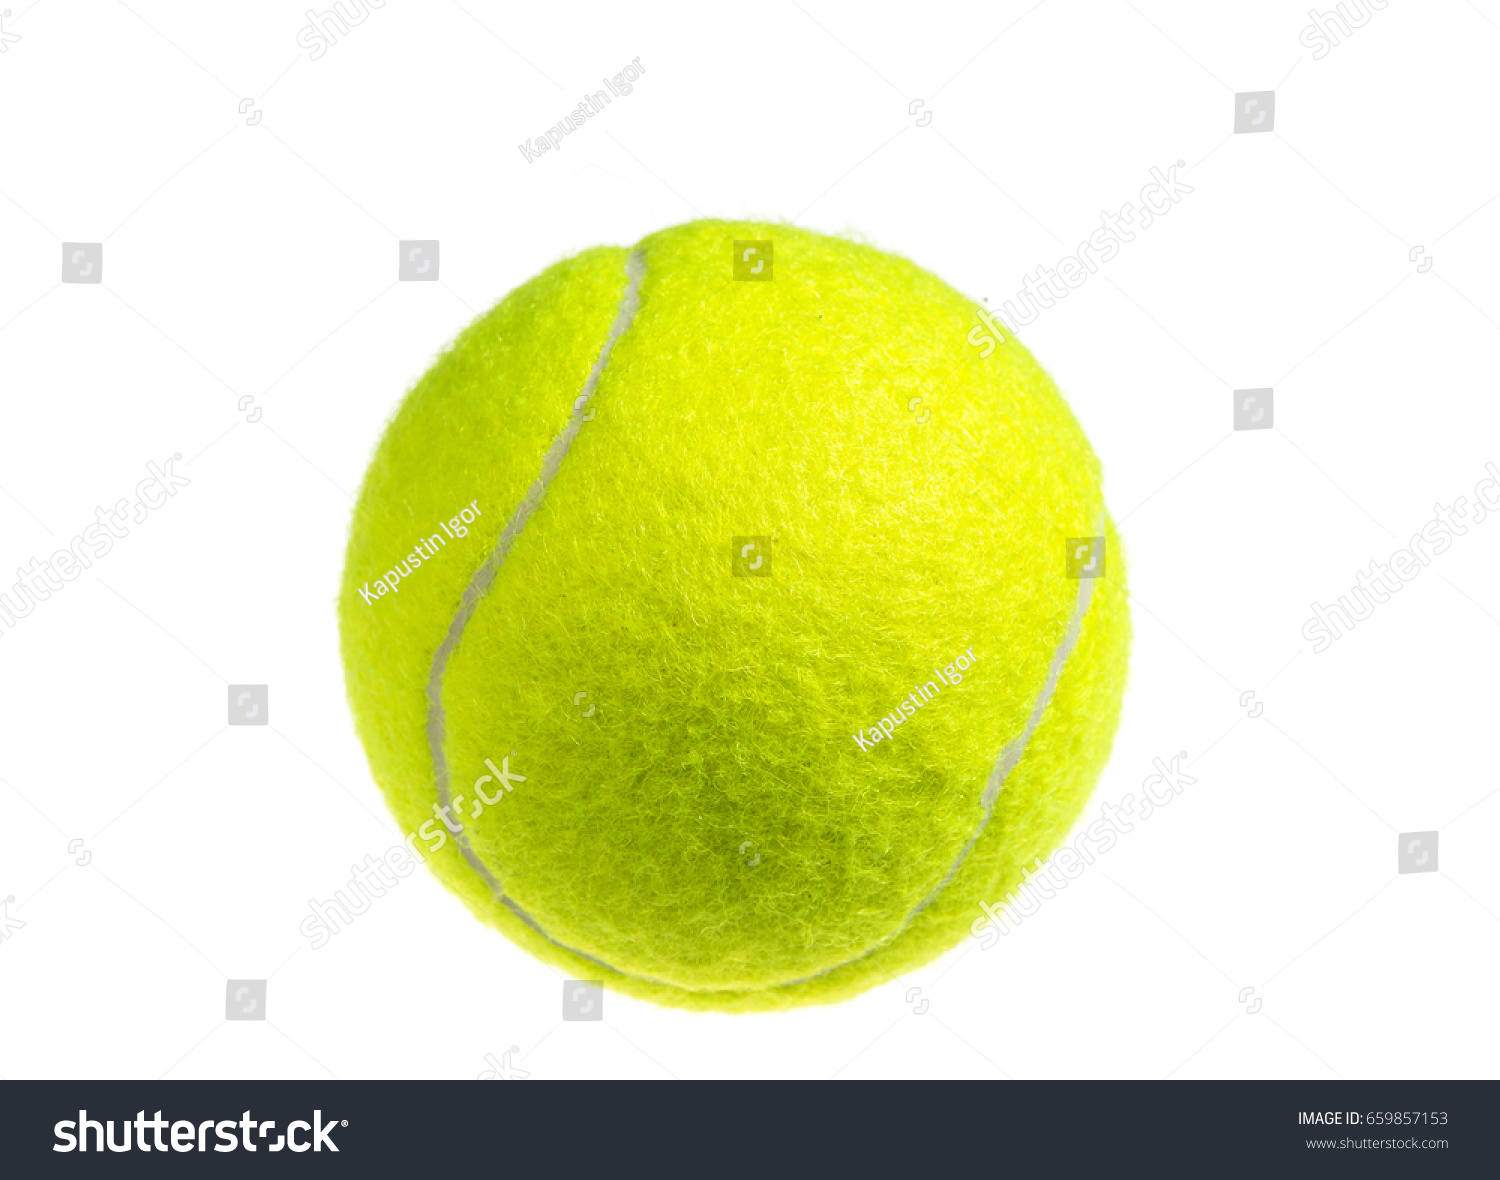 Tennis ball isolated on white background #659857153